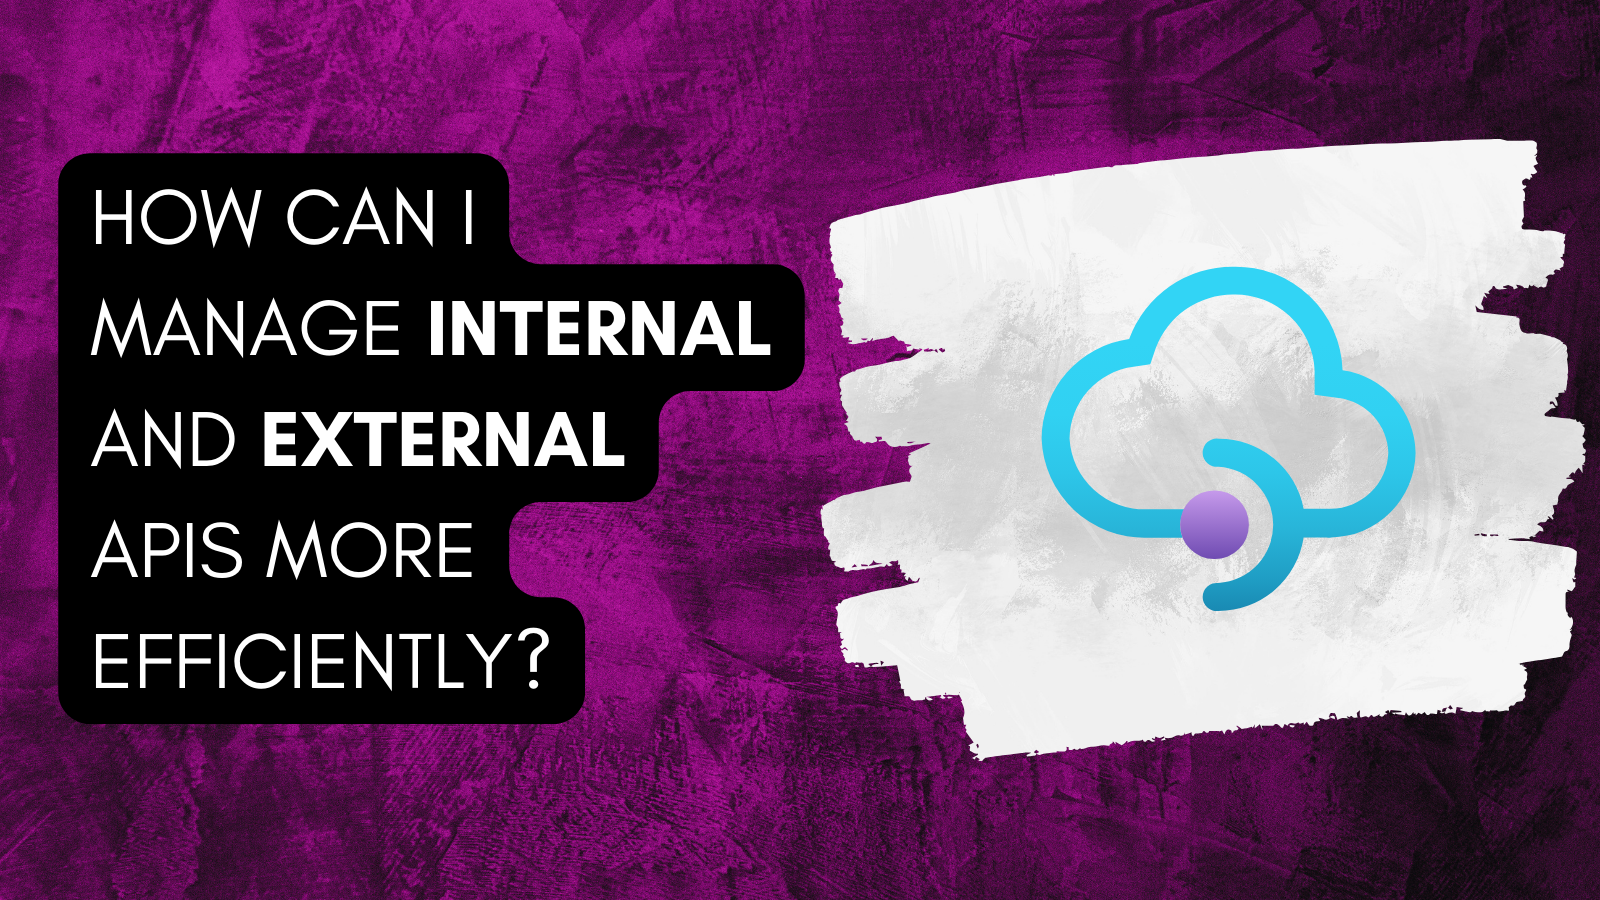 How can I manage internal and external APIs more efficiently?